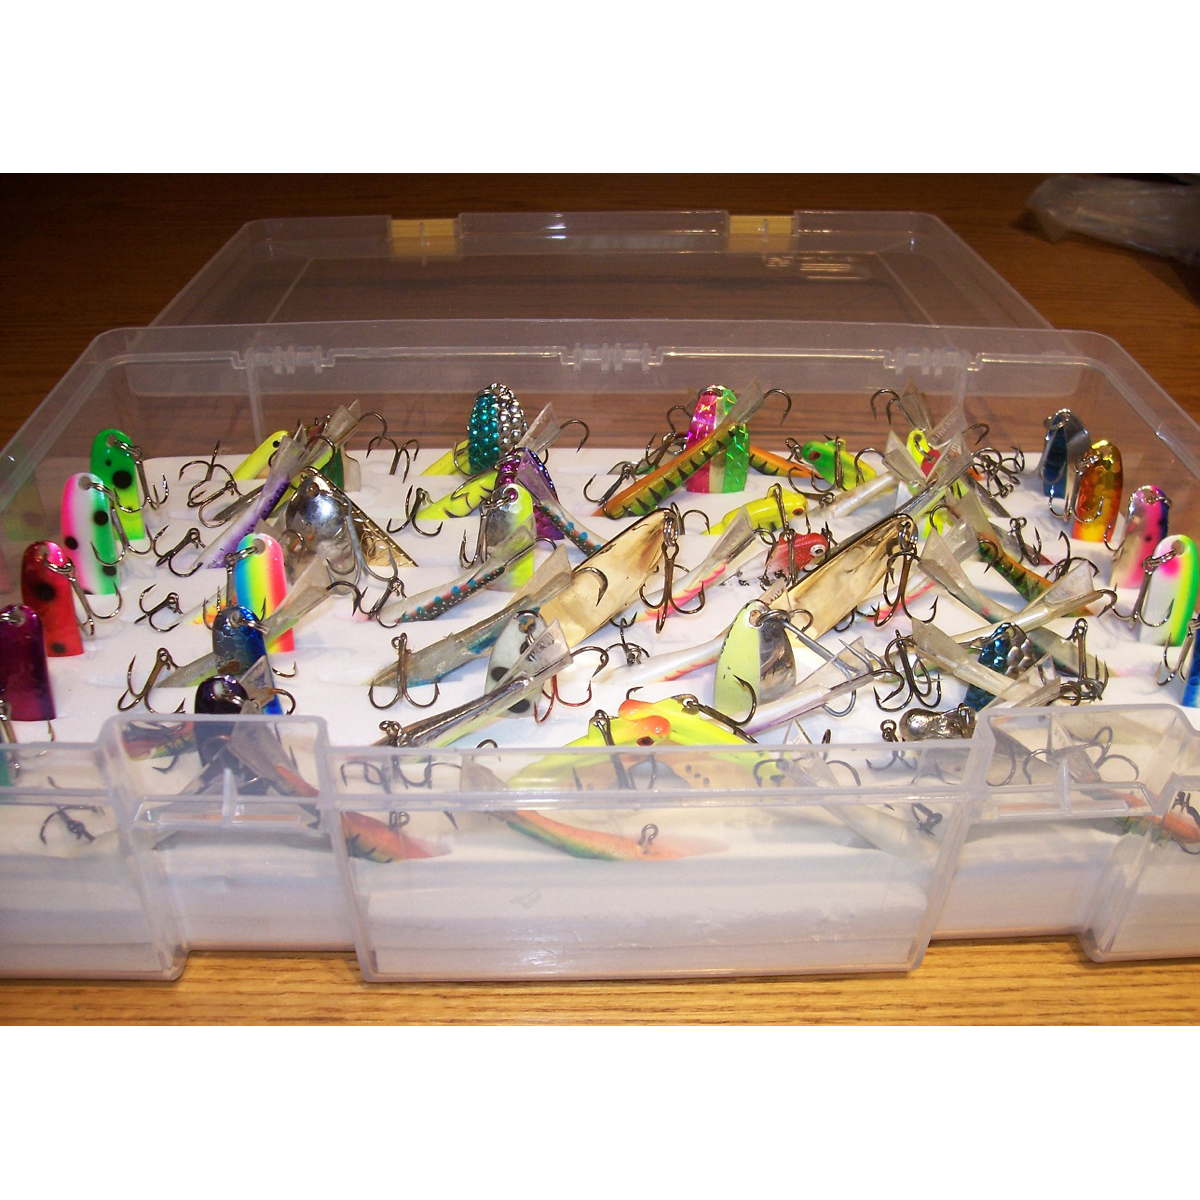 Photo of Amish Outfitters Ice Jigging Rapala and Spoon Caddy for sale at United Tackle Shops.